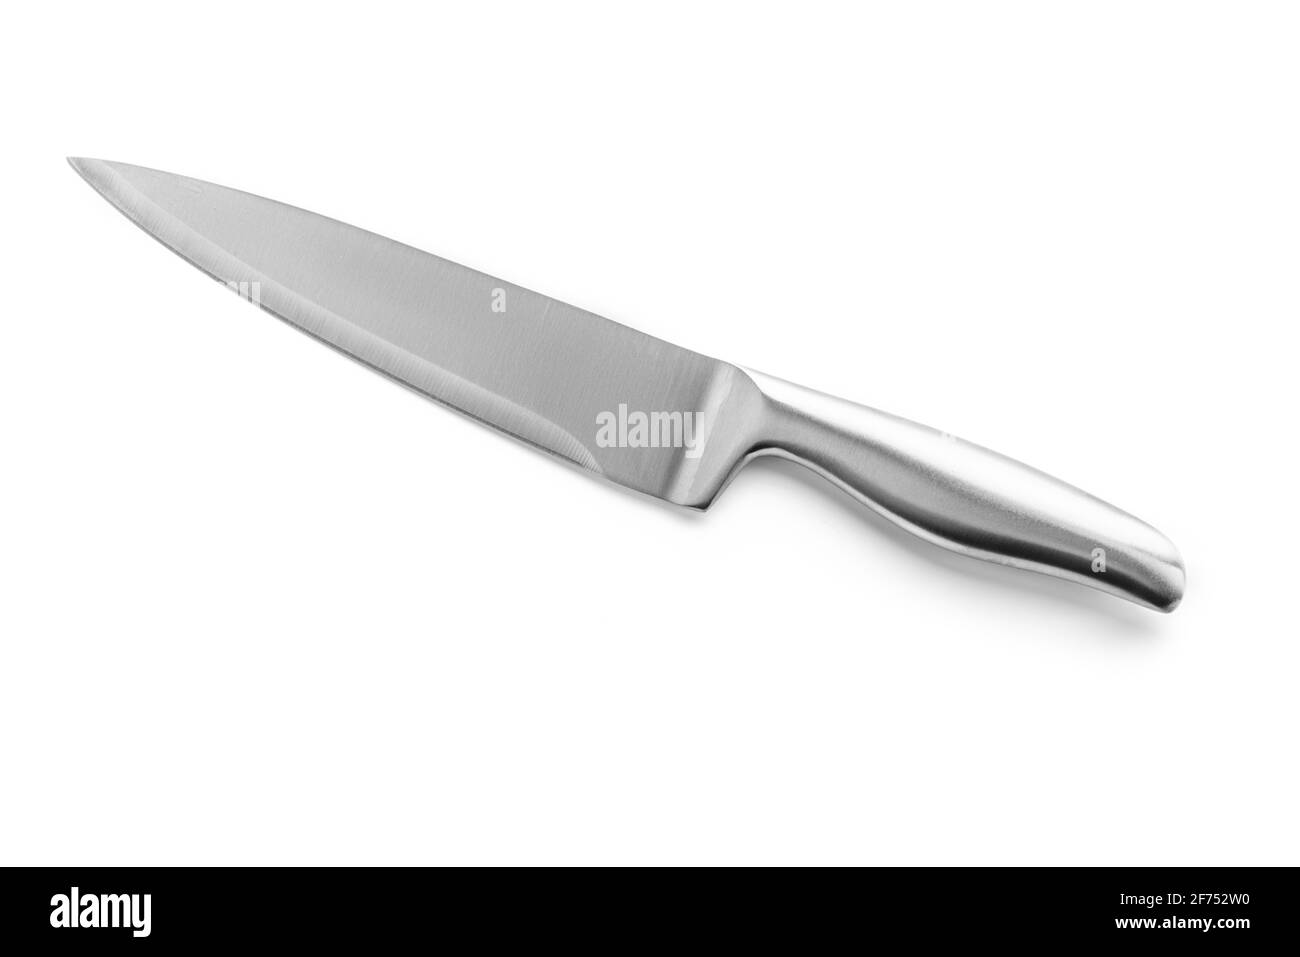 Steel kitchen knife. Chef professional  knife isolated on white background. Stock Photo